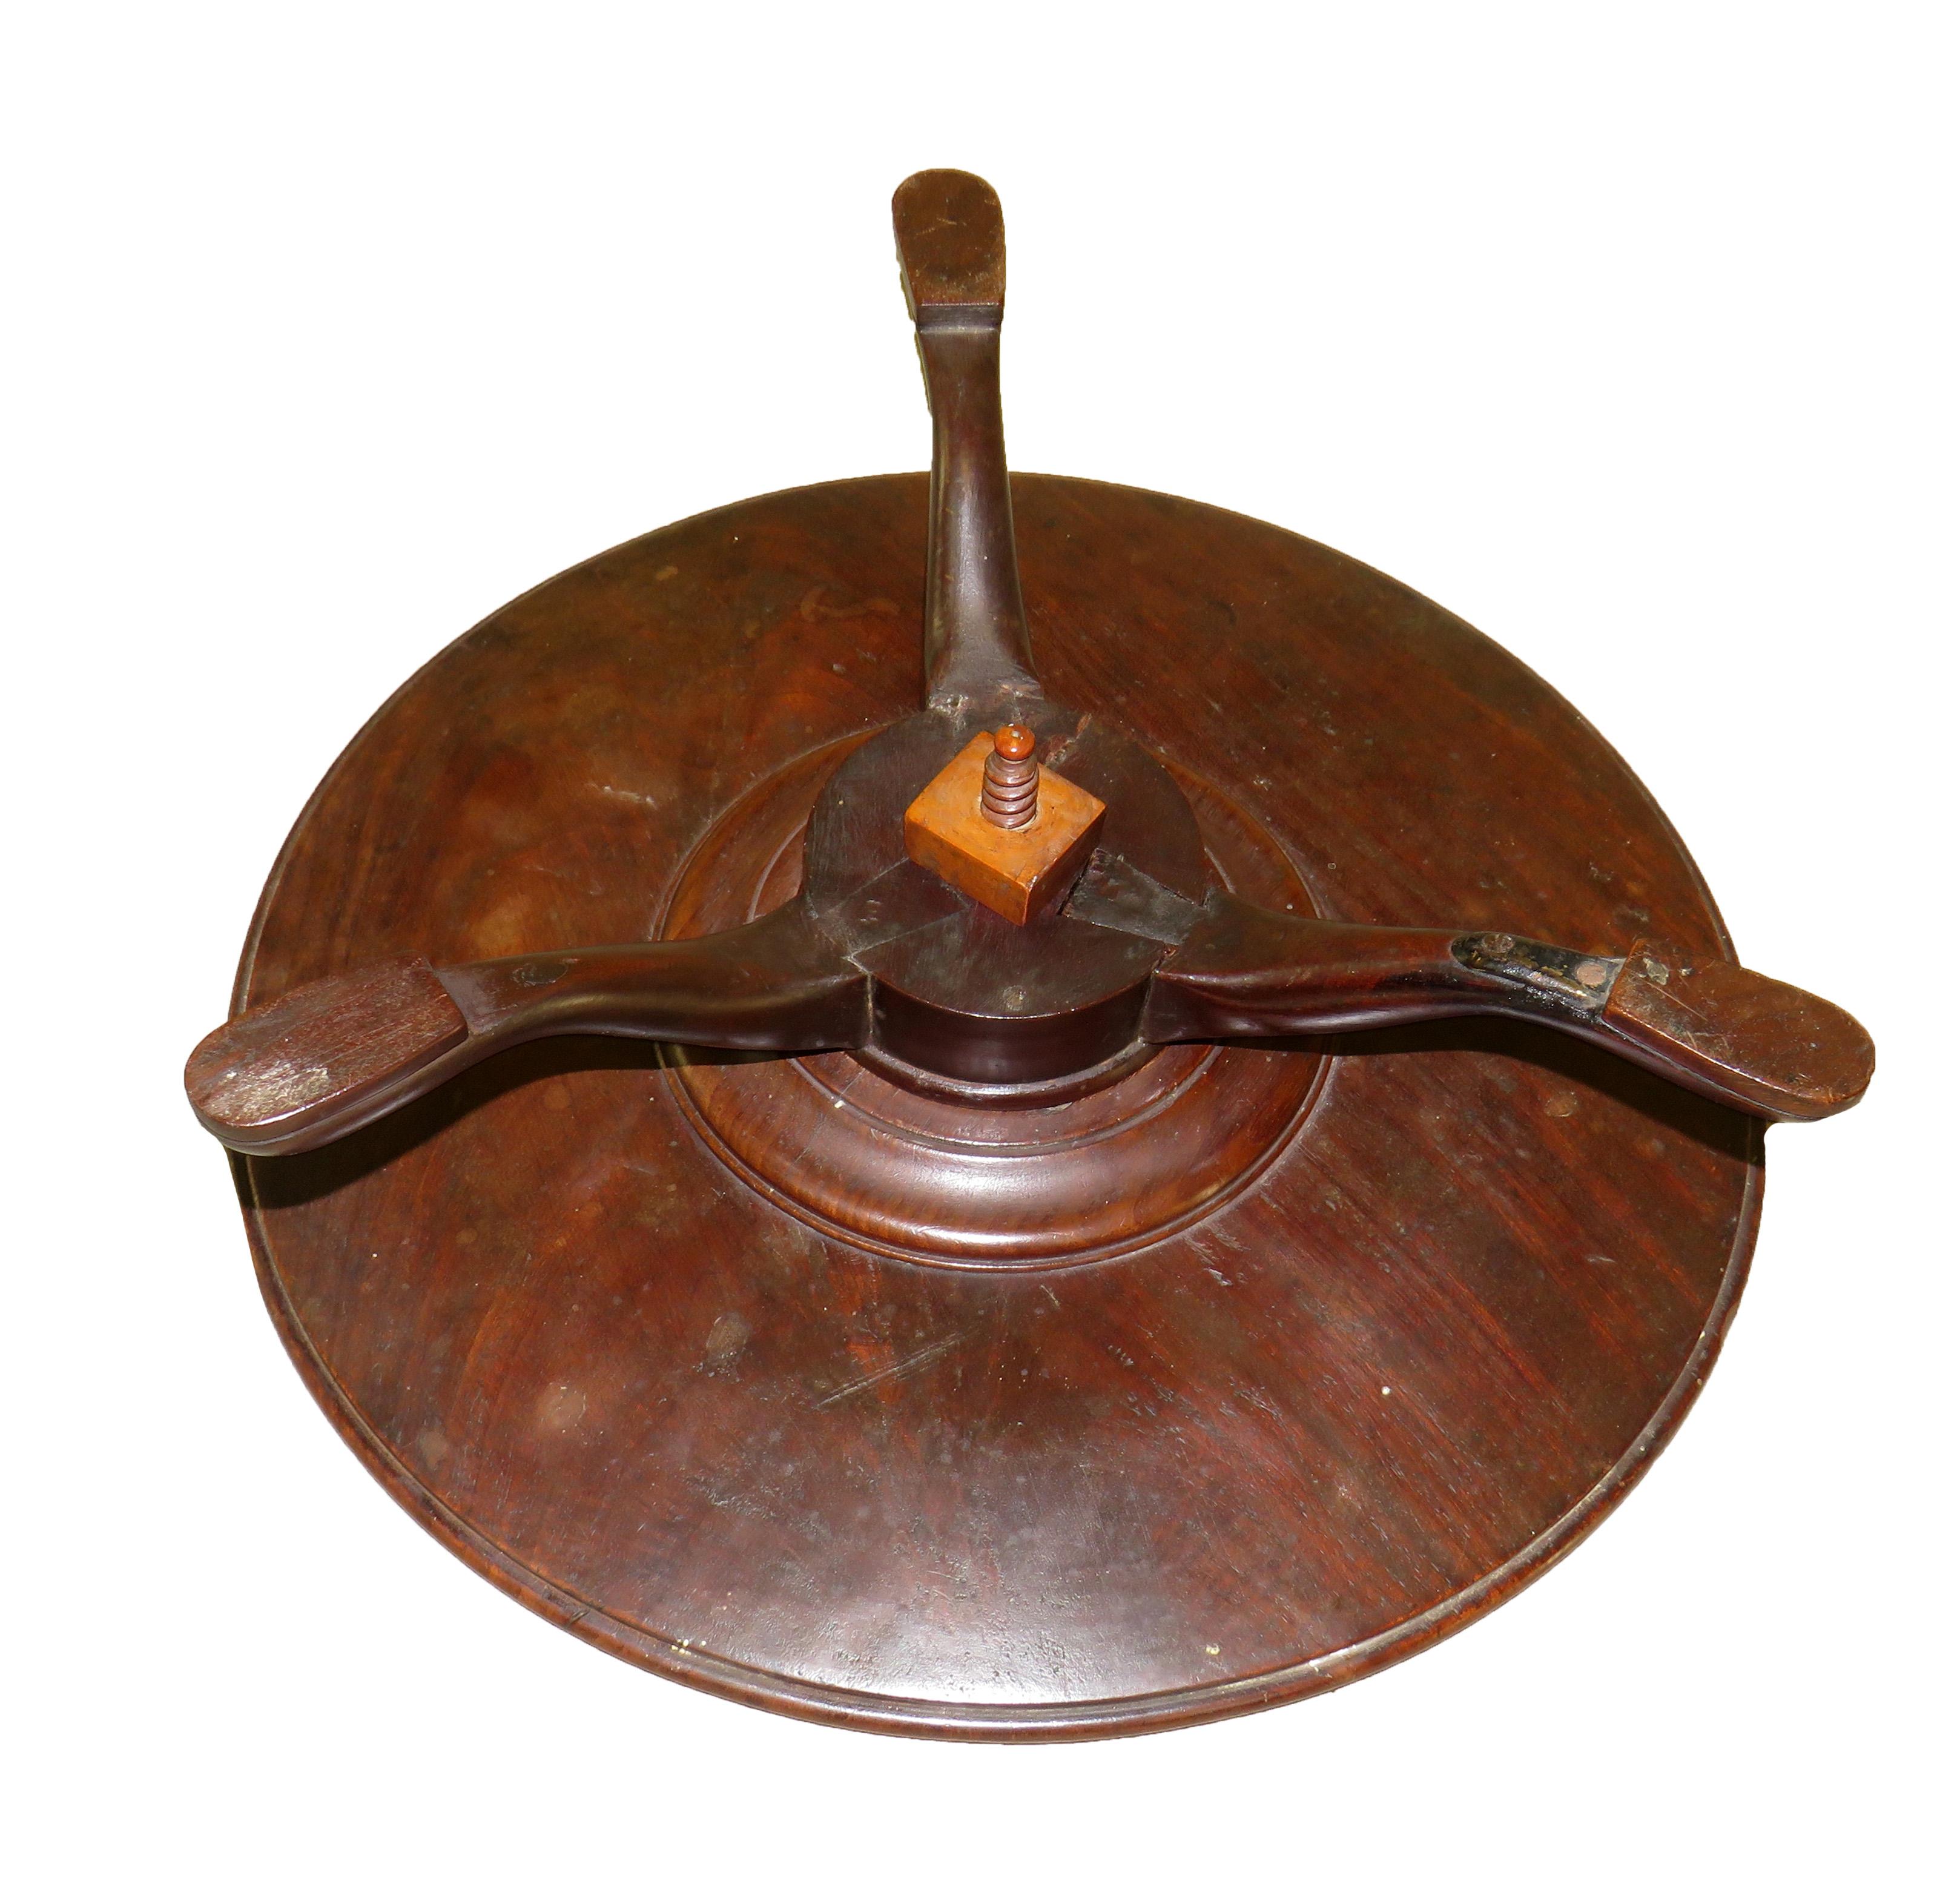 An exceptionally rare 18th century mahogany Chippendale period
Lazy Susan having superbly figured rotating circular top retaining
Rich color and patina raised on elegant tripod legs

(By far the earliest example of a Lazy Susan that we have come